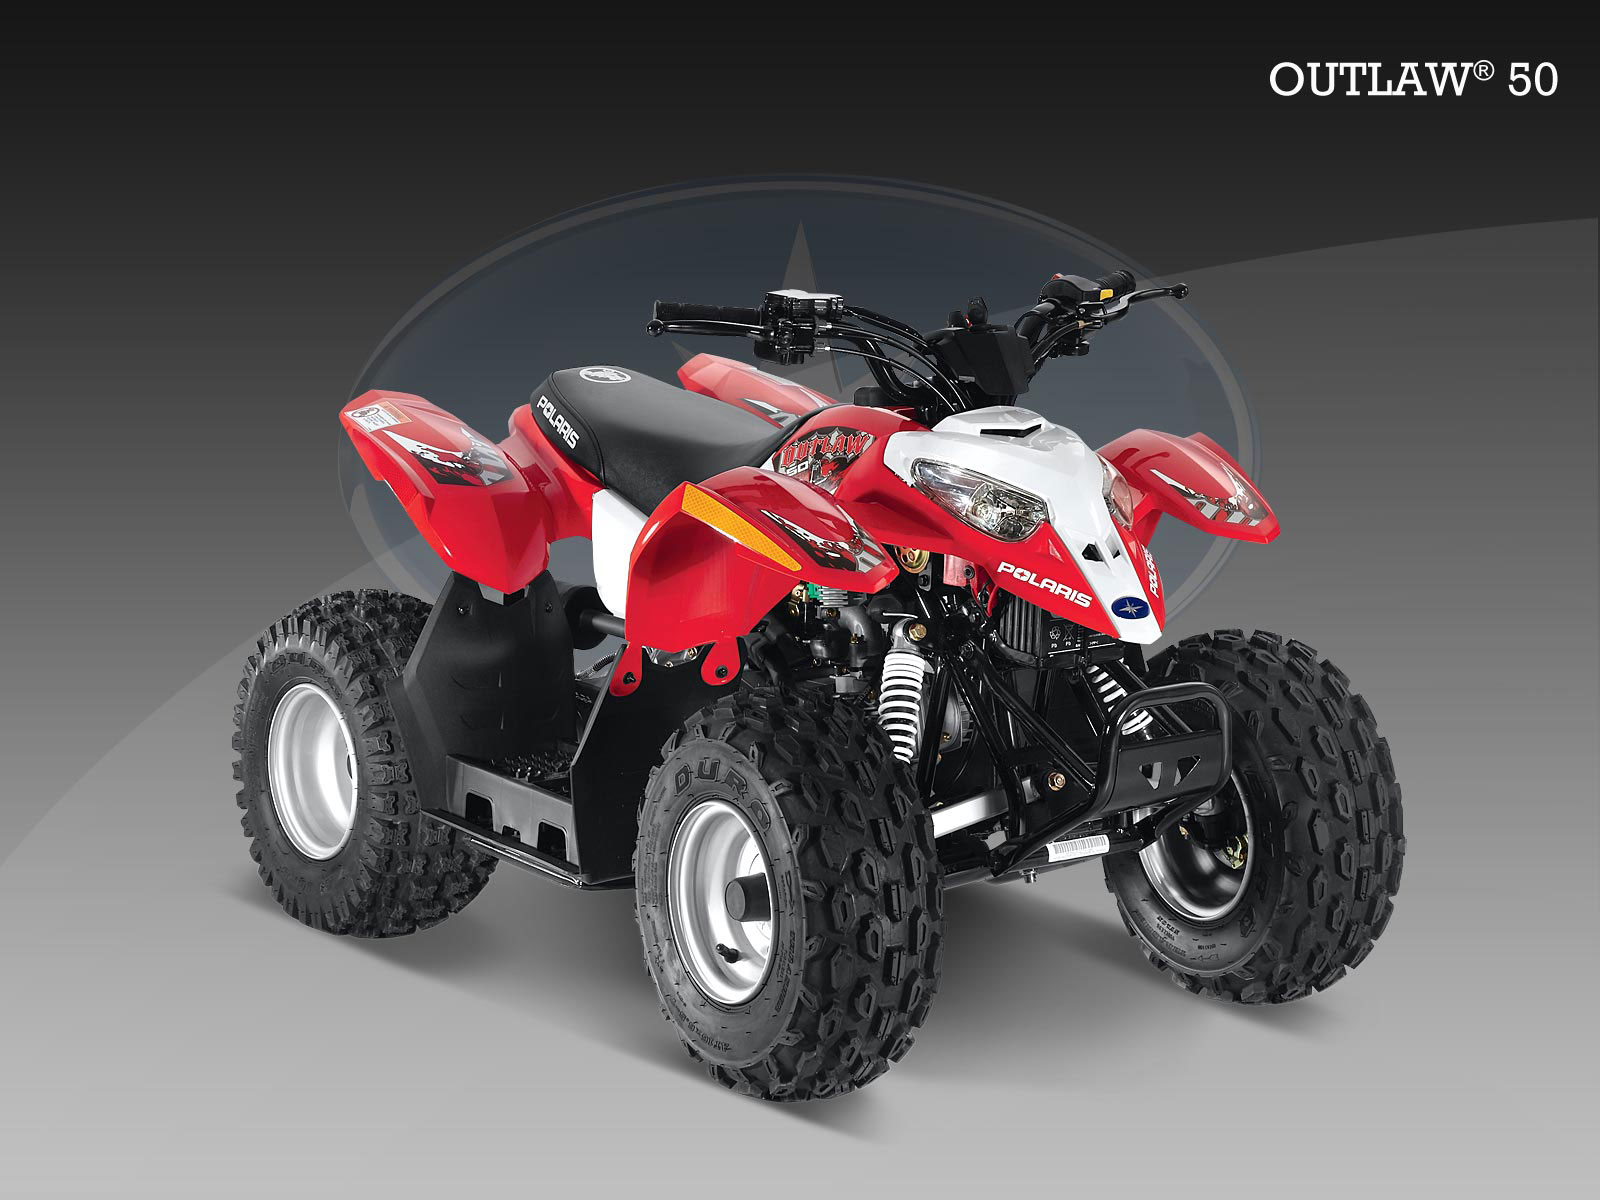 The 2010 Polaris Outlaw® 50 Youth ATV is one of the best selling youth ATVs